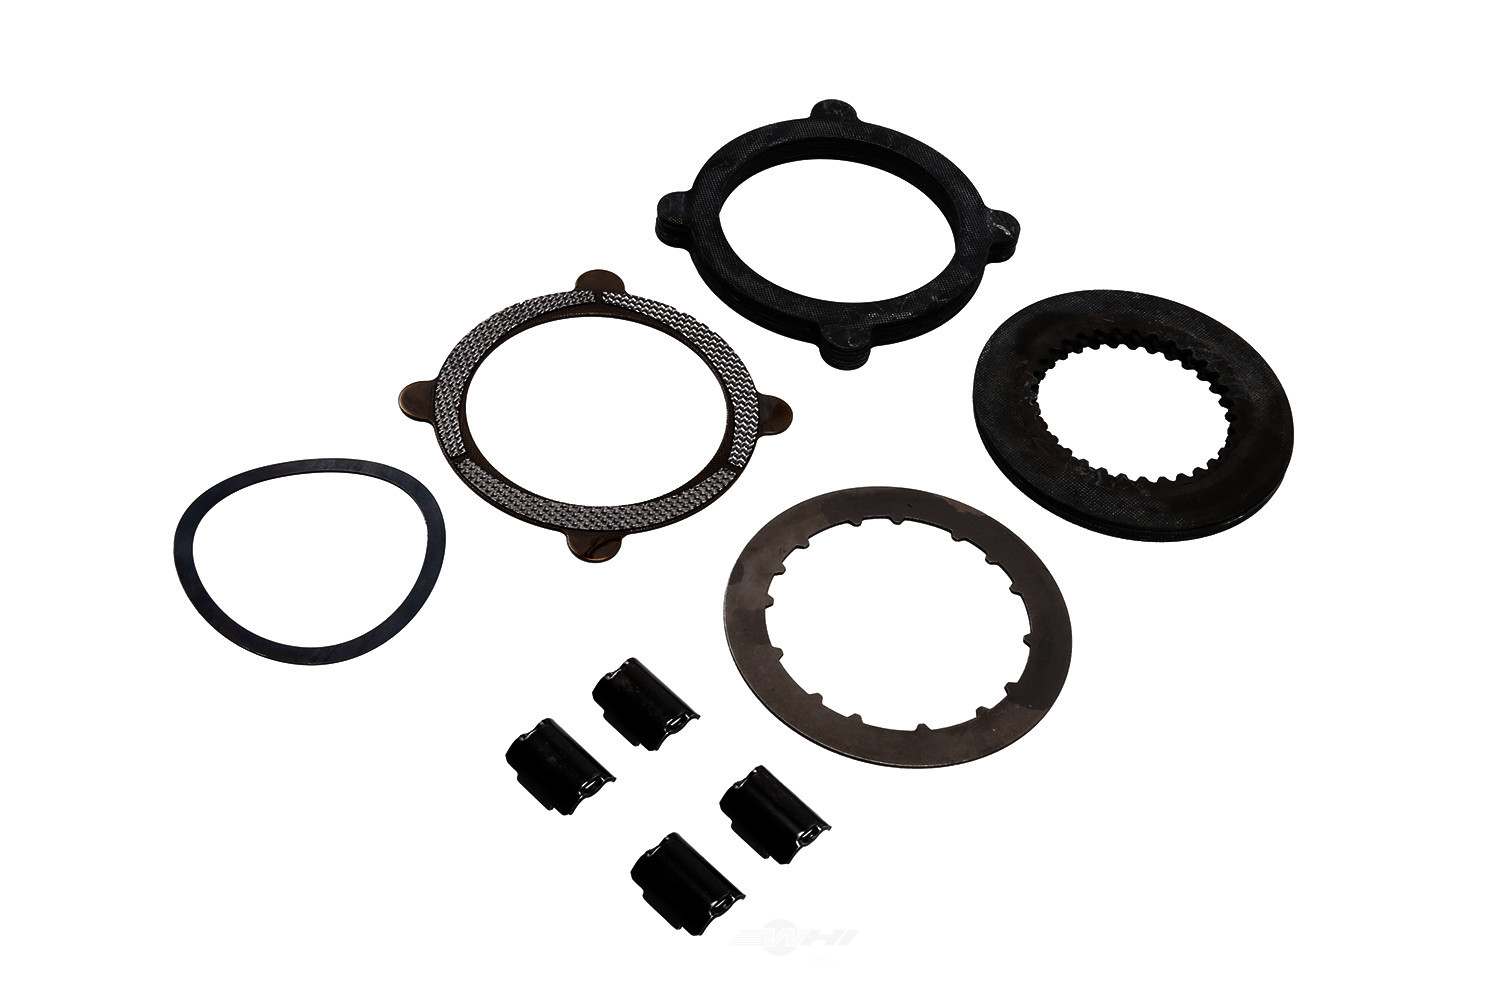 GM GENUINE PARTS - Differential Clutch Pack - GMP 84175329